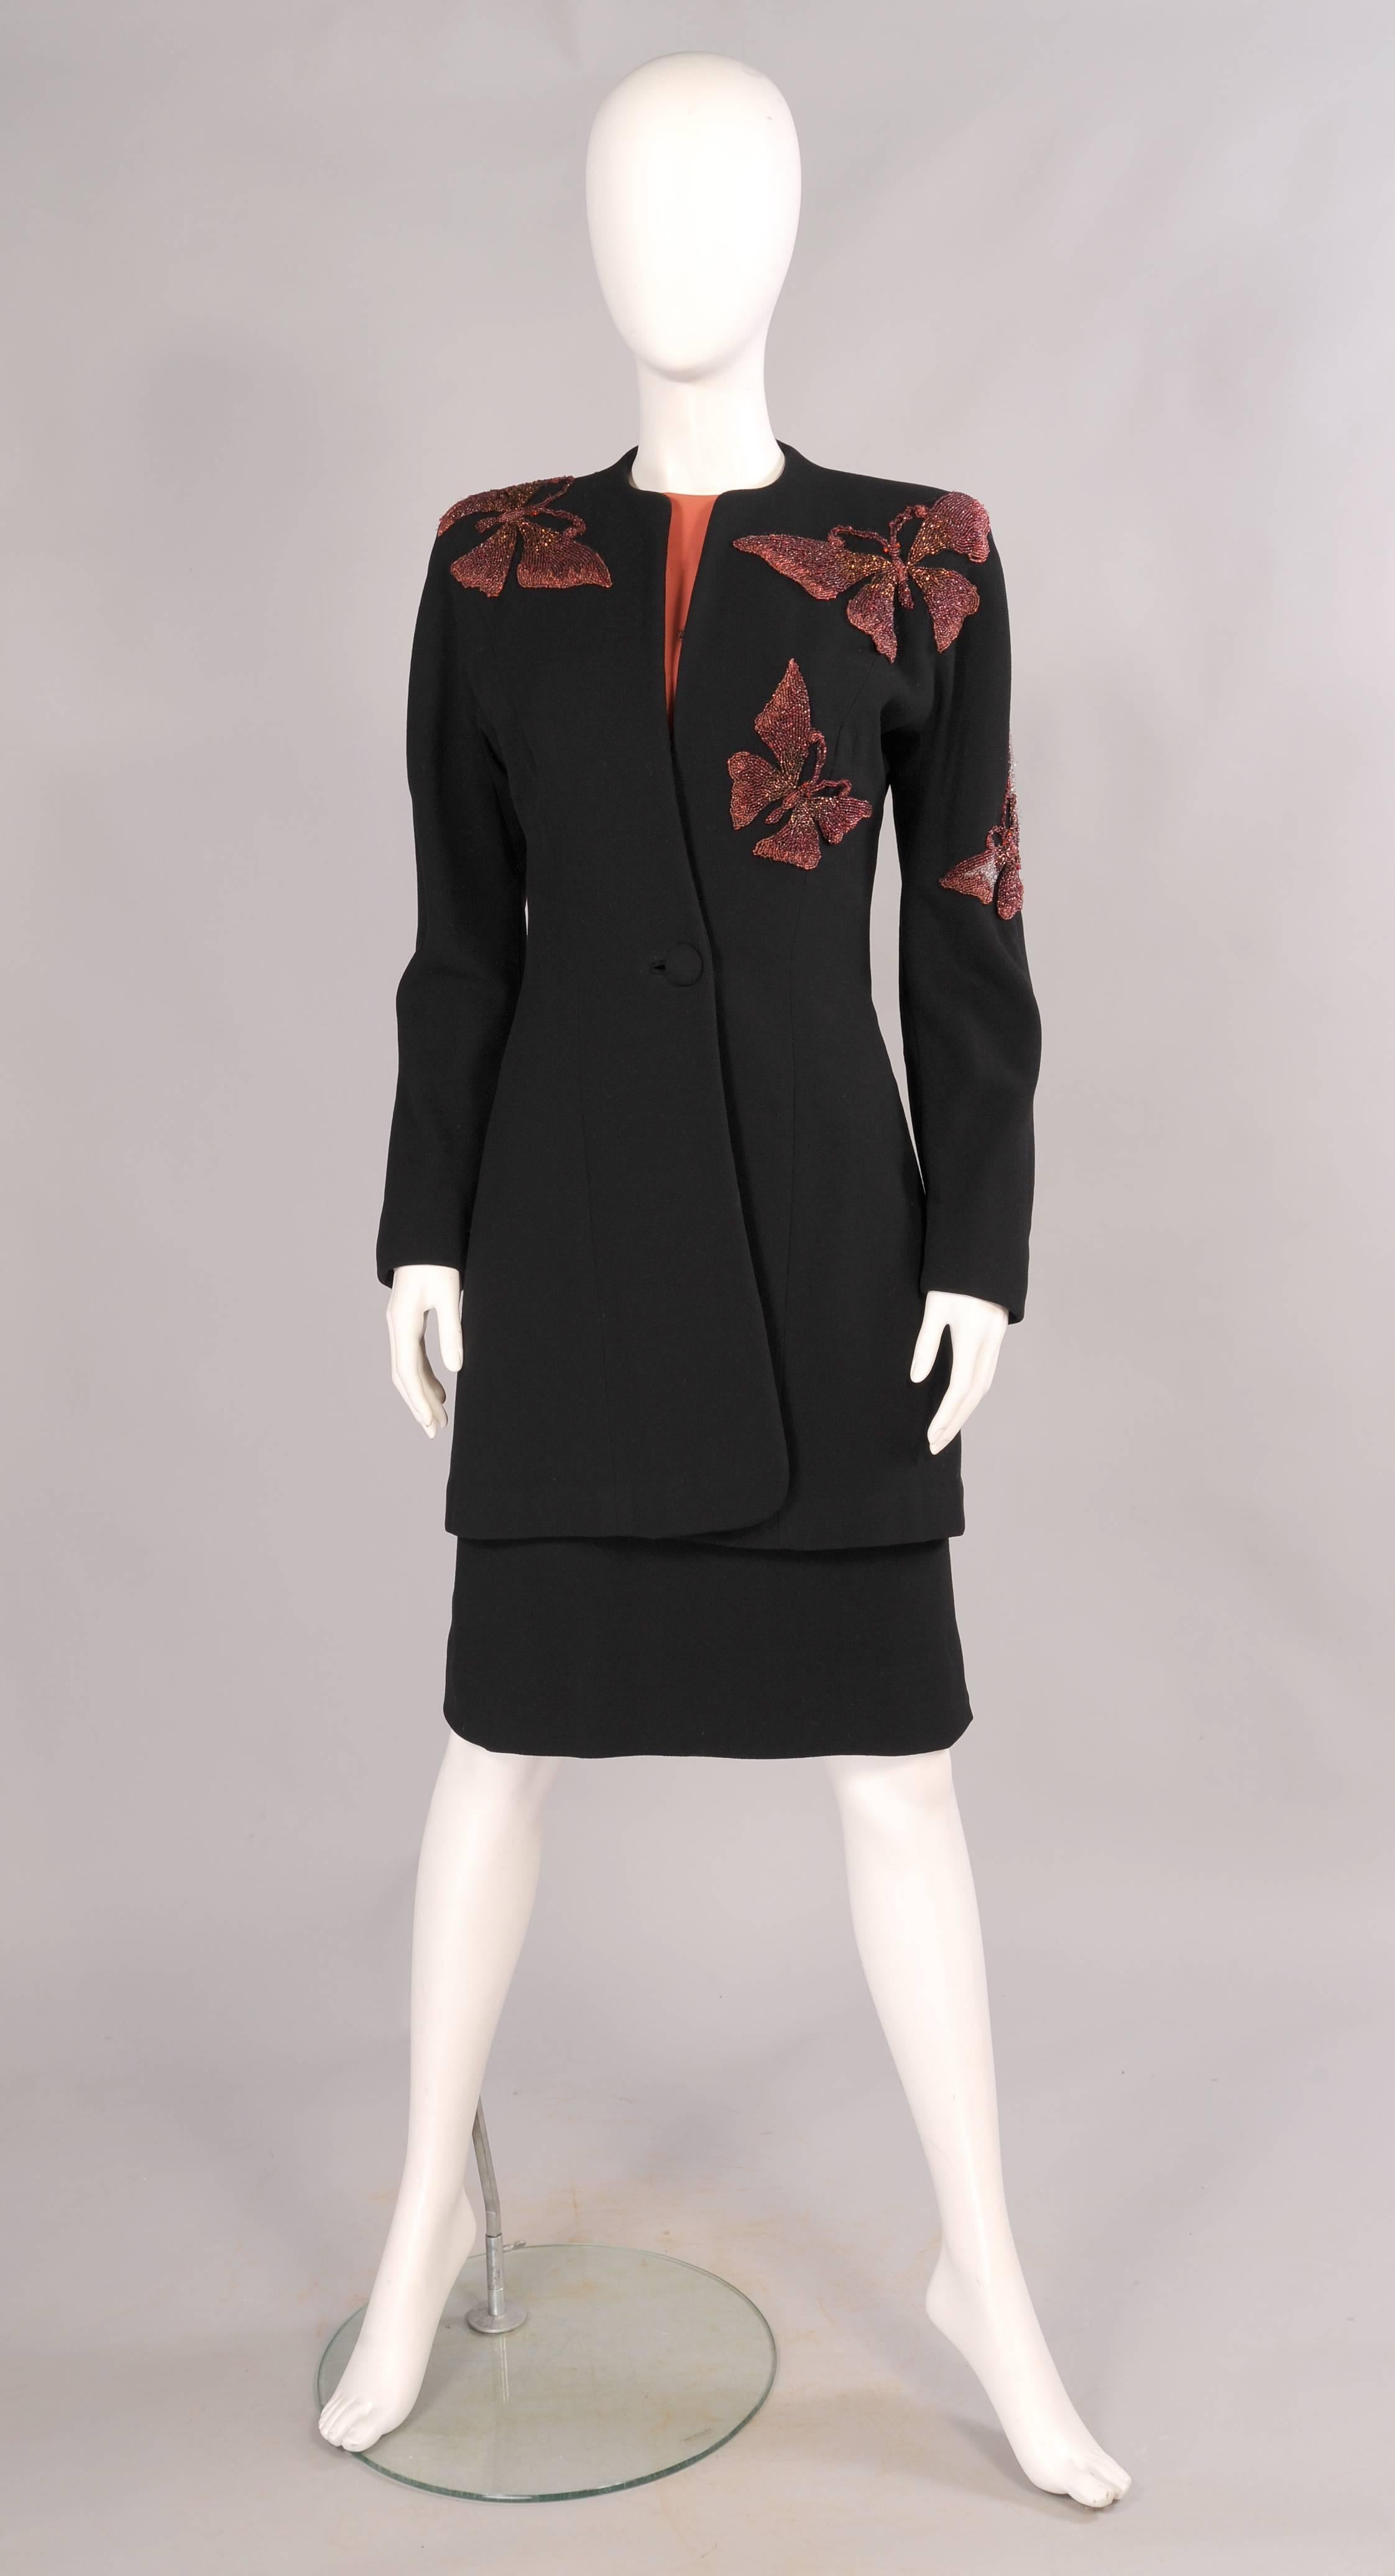 A fitted 3/4 length black wool coat is dramatically embellished with larger than life size beaded butterflies. The matching dress has a salmon colored bodice with a large butterfly on the left shoulder and a smaller one on the right hip of the black